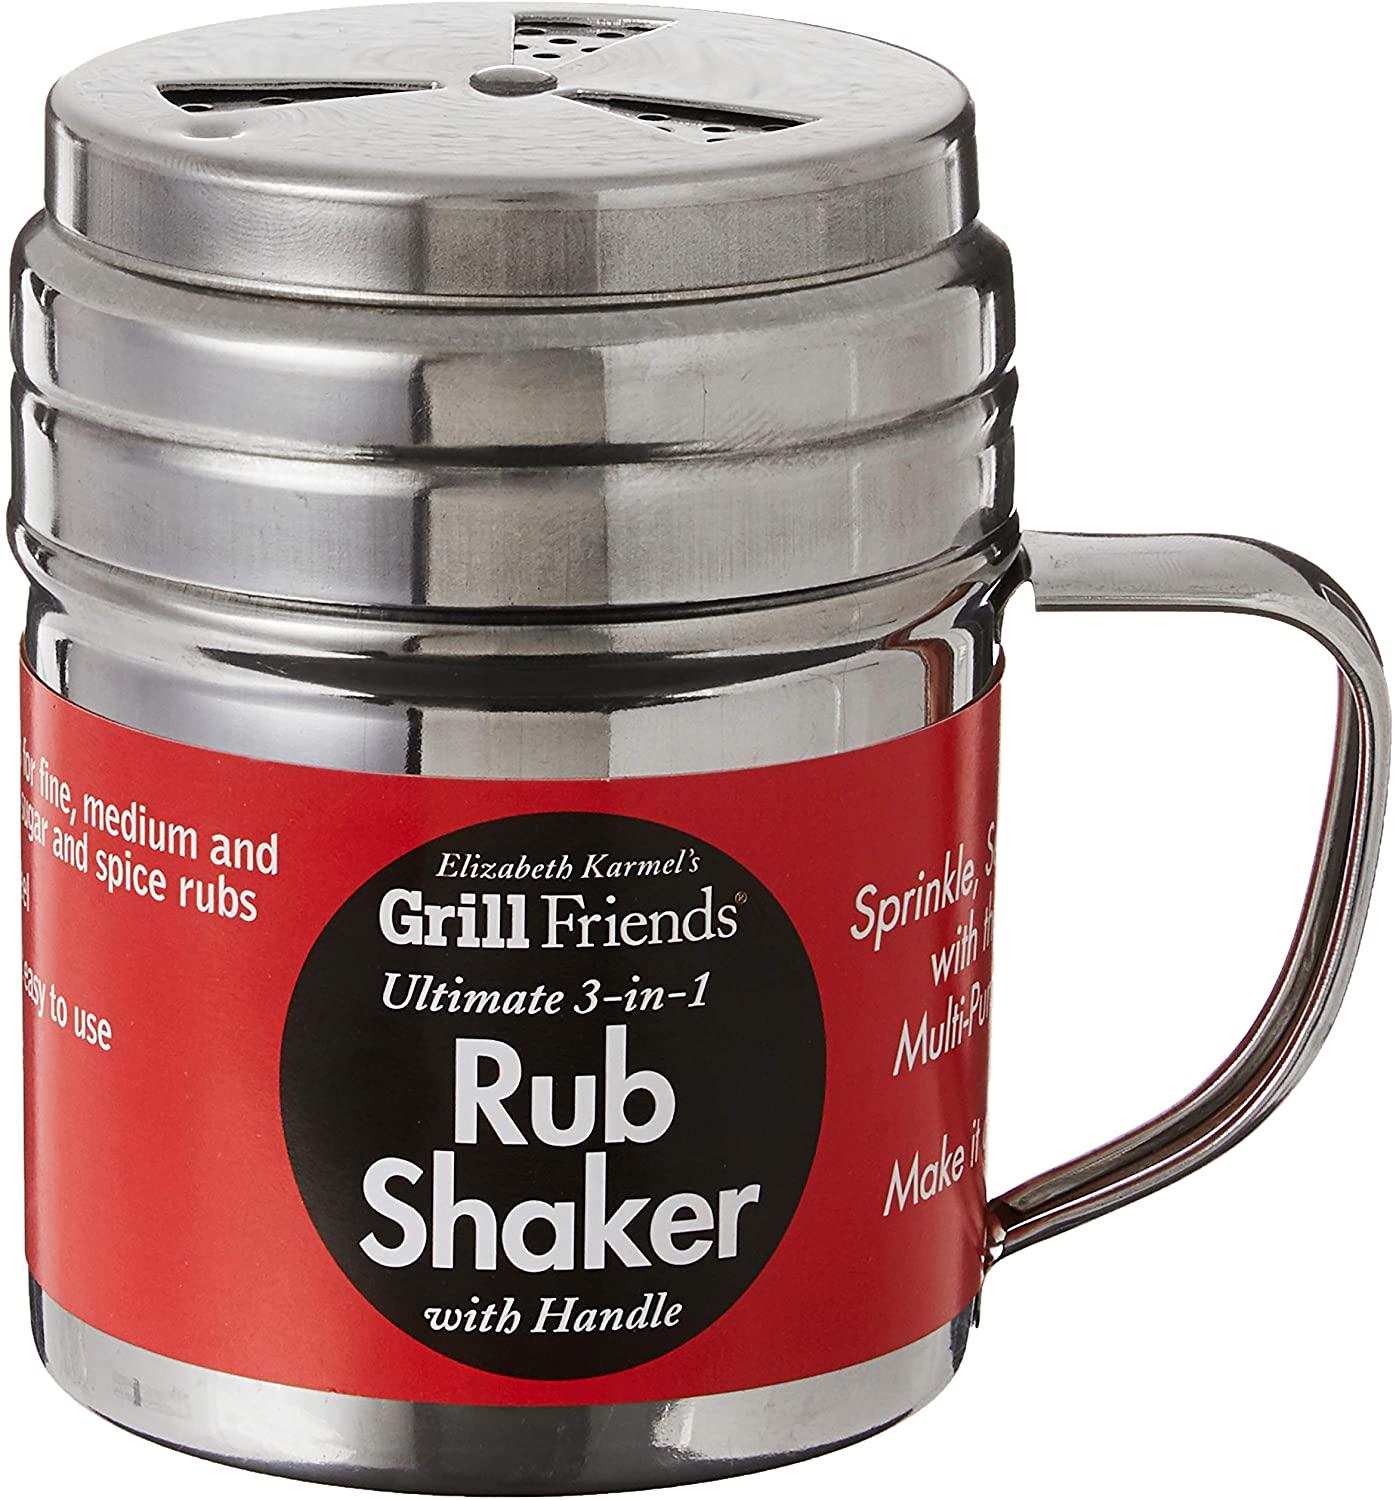 HIC Harold Import Co., Elizabeth Karmel s Adjustable Dry Rub Shaker with Holes for Medium and Coarse Grind Seasonings, Stainless Steel, 1-Cup Capacity